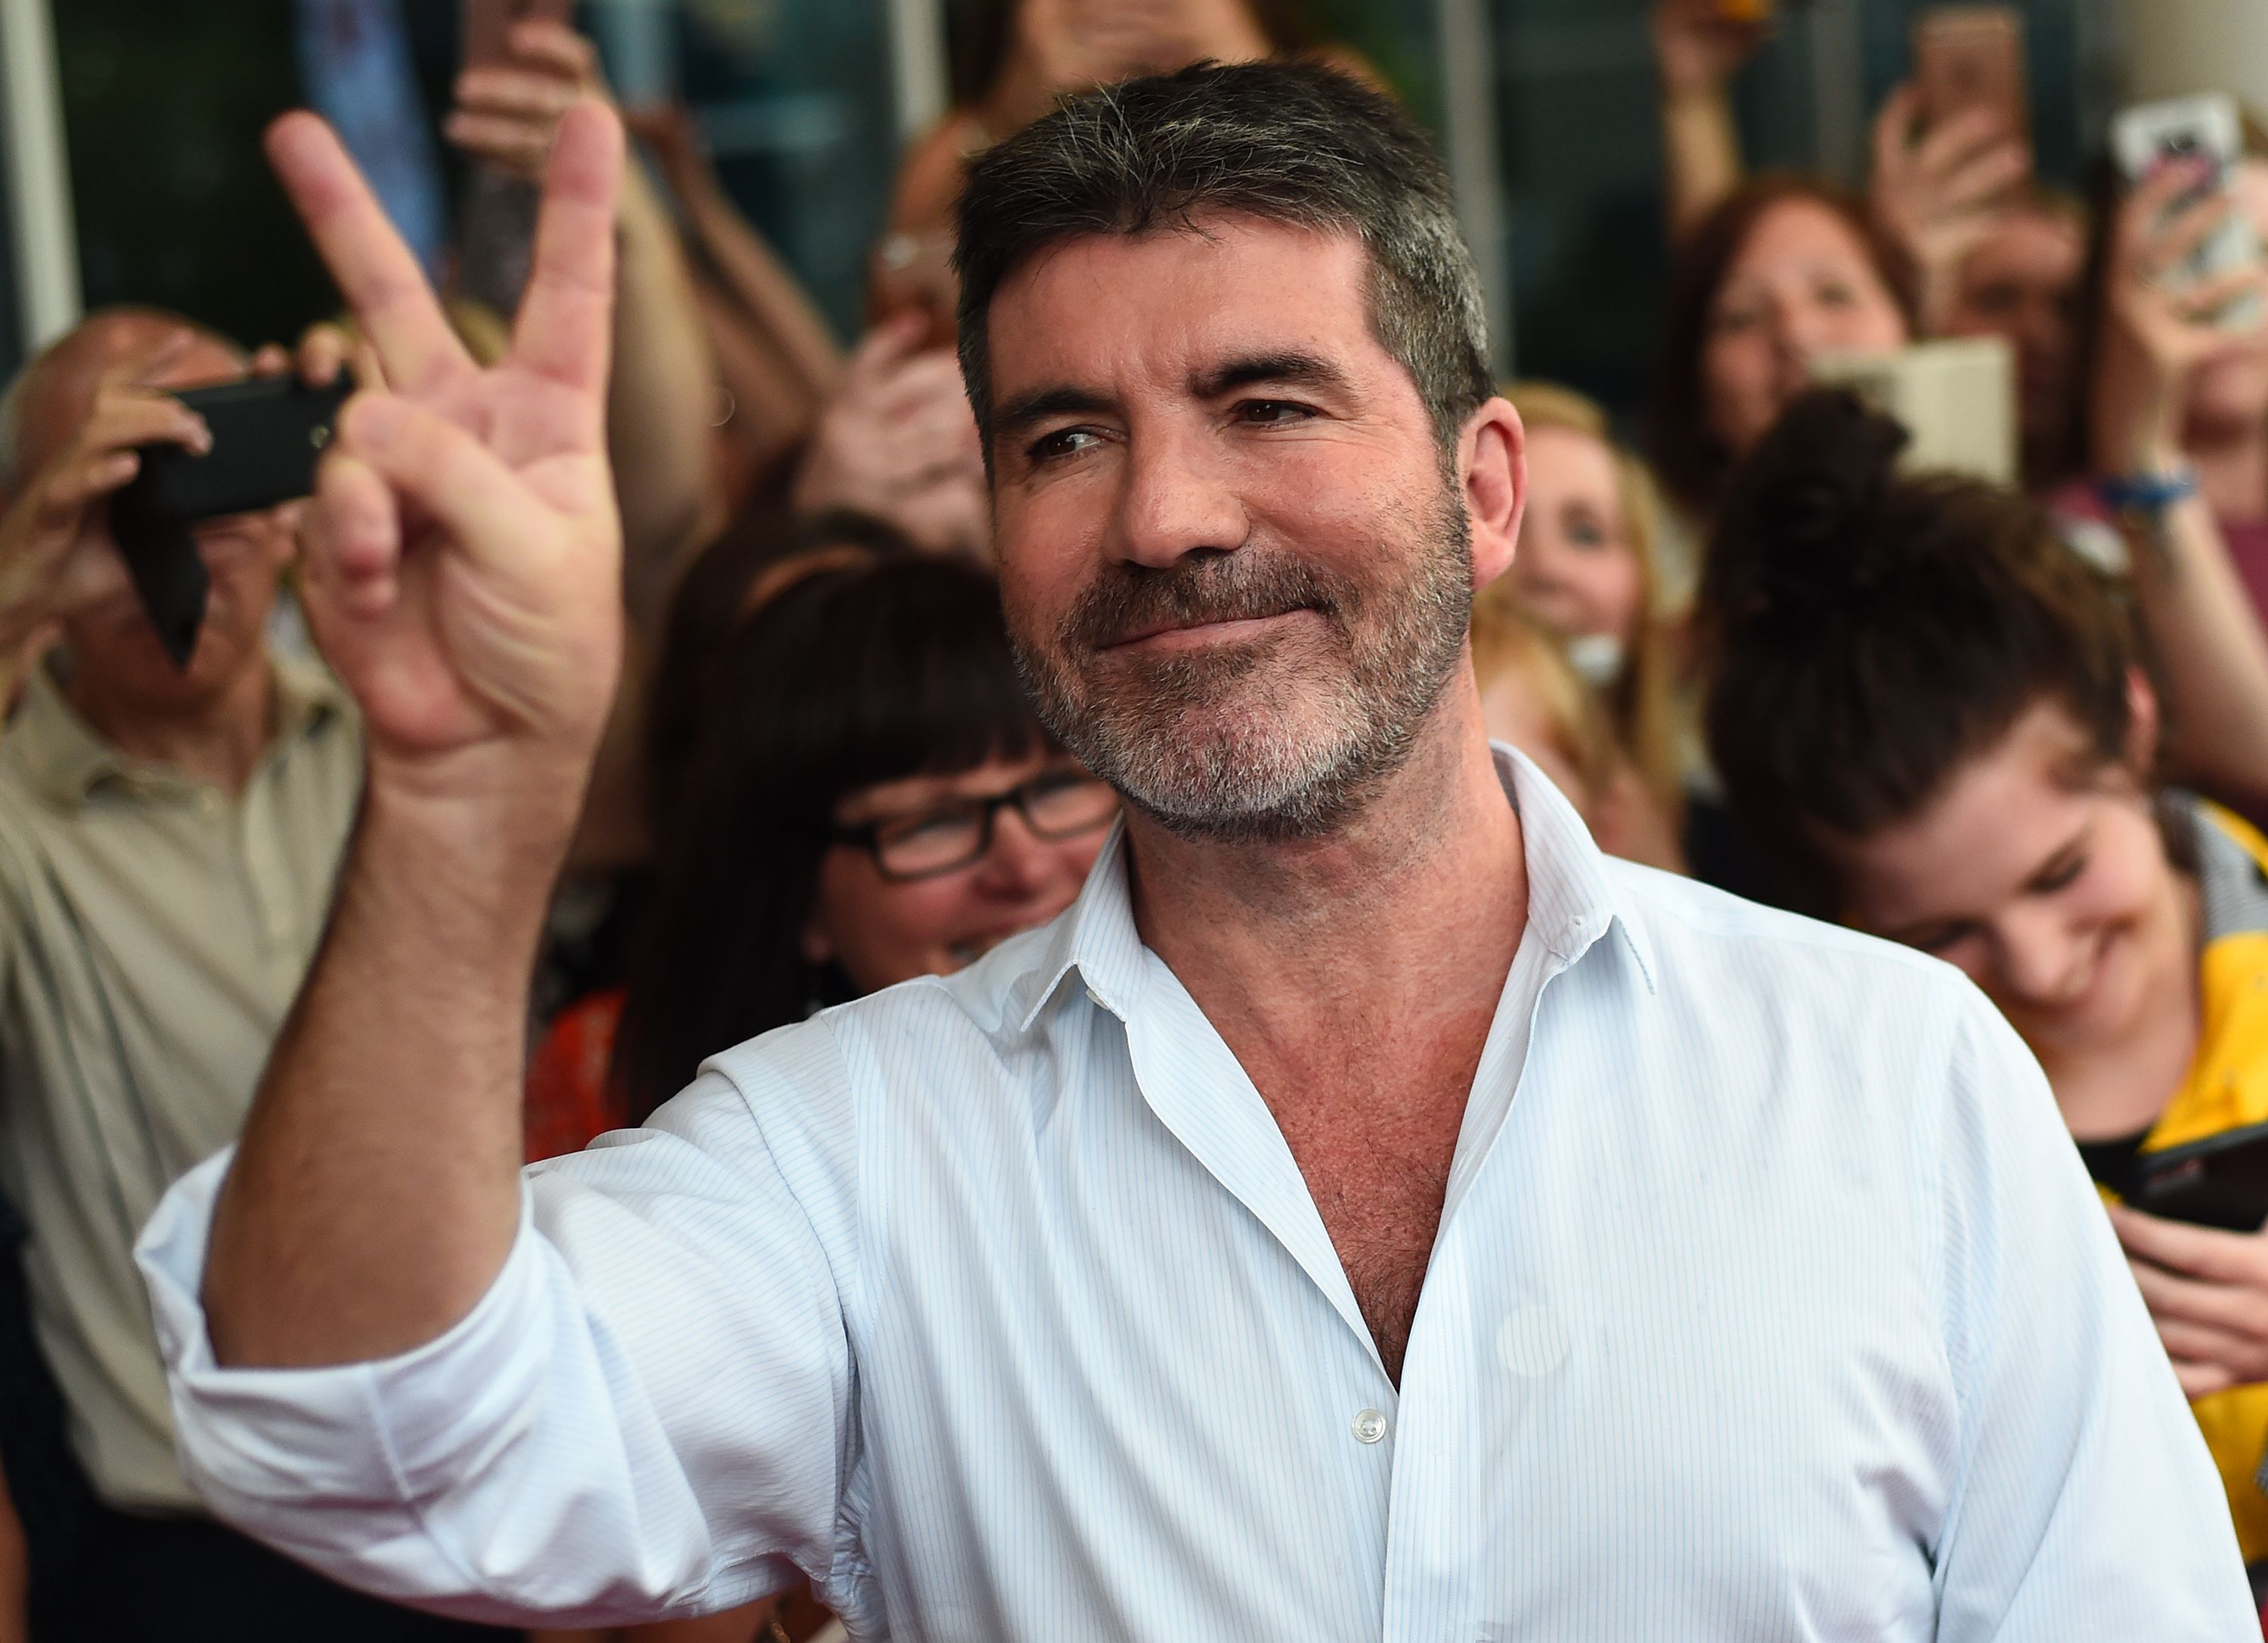 What Happened to Simon Cowell? - The 'AGT' Judge Talks About His Bike  Accident in 2020